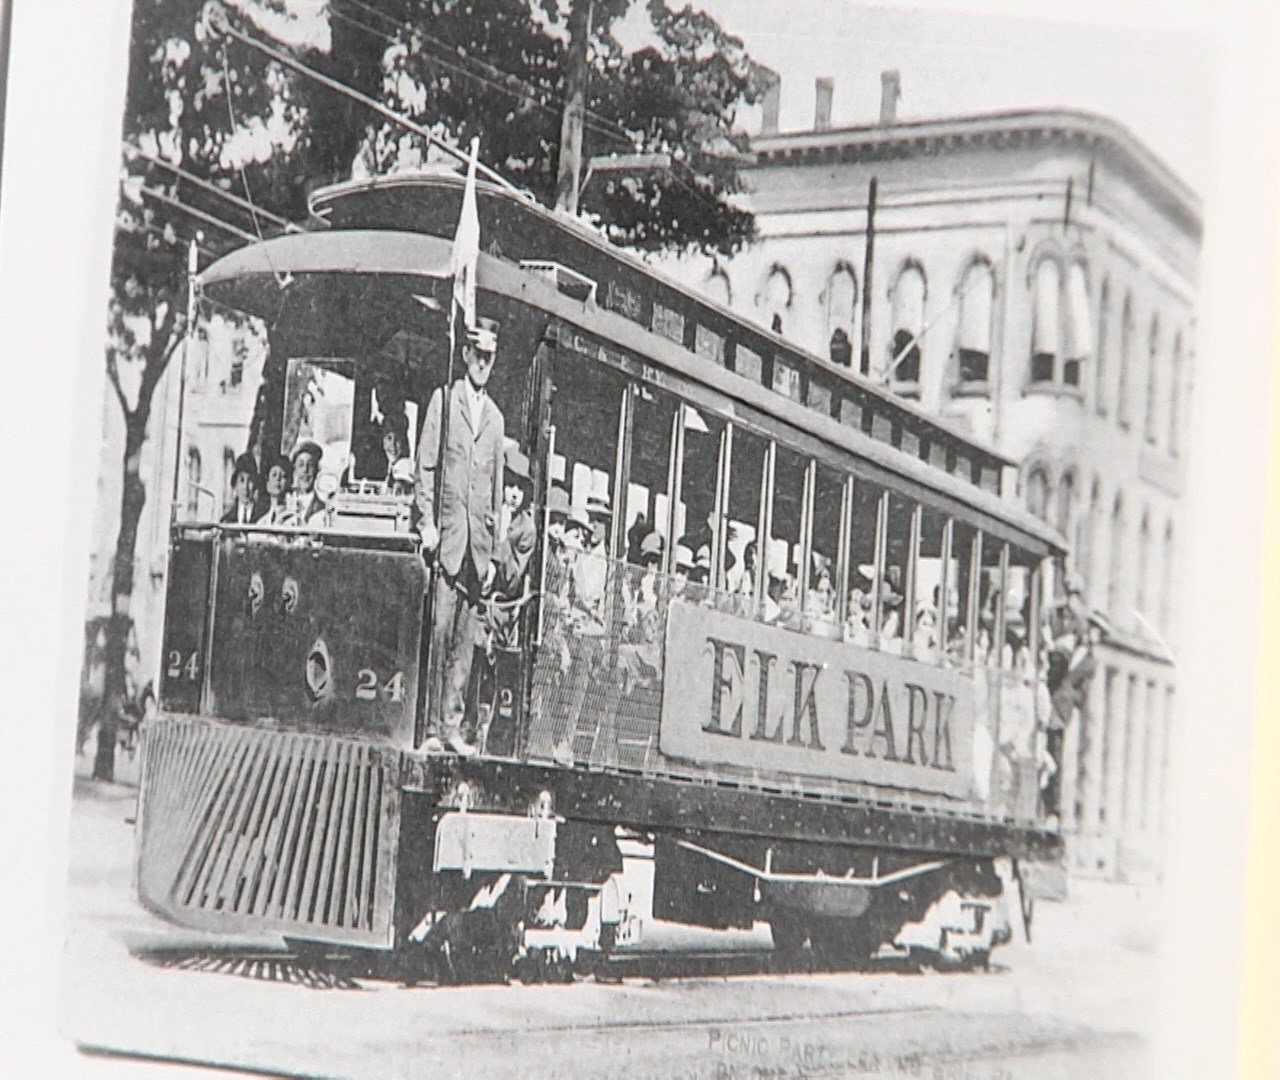 Trolley Line Provided Lots of Fun in West Erie County